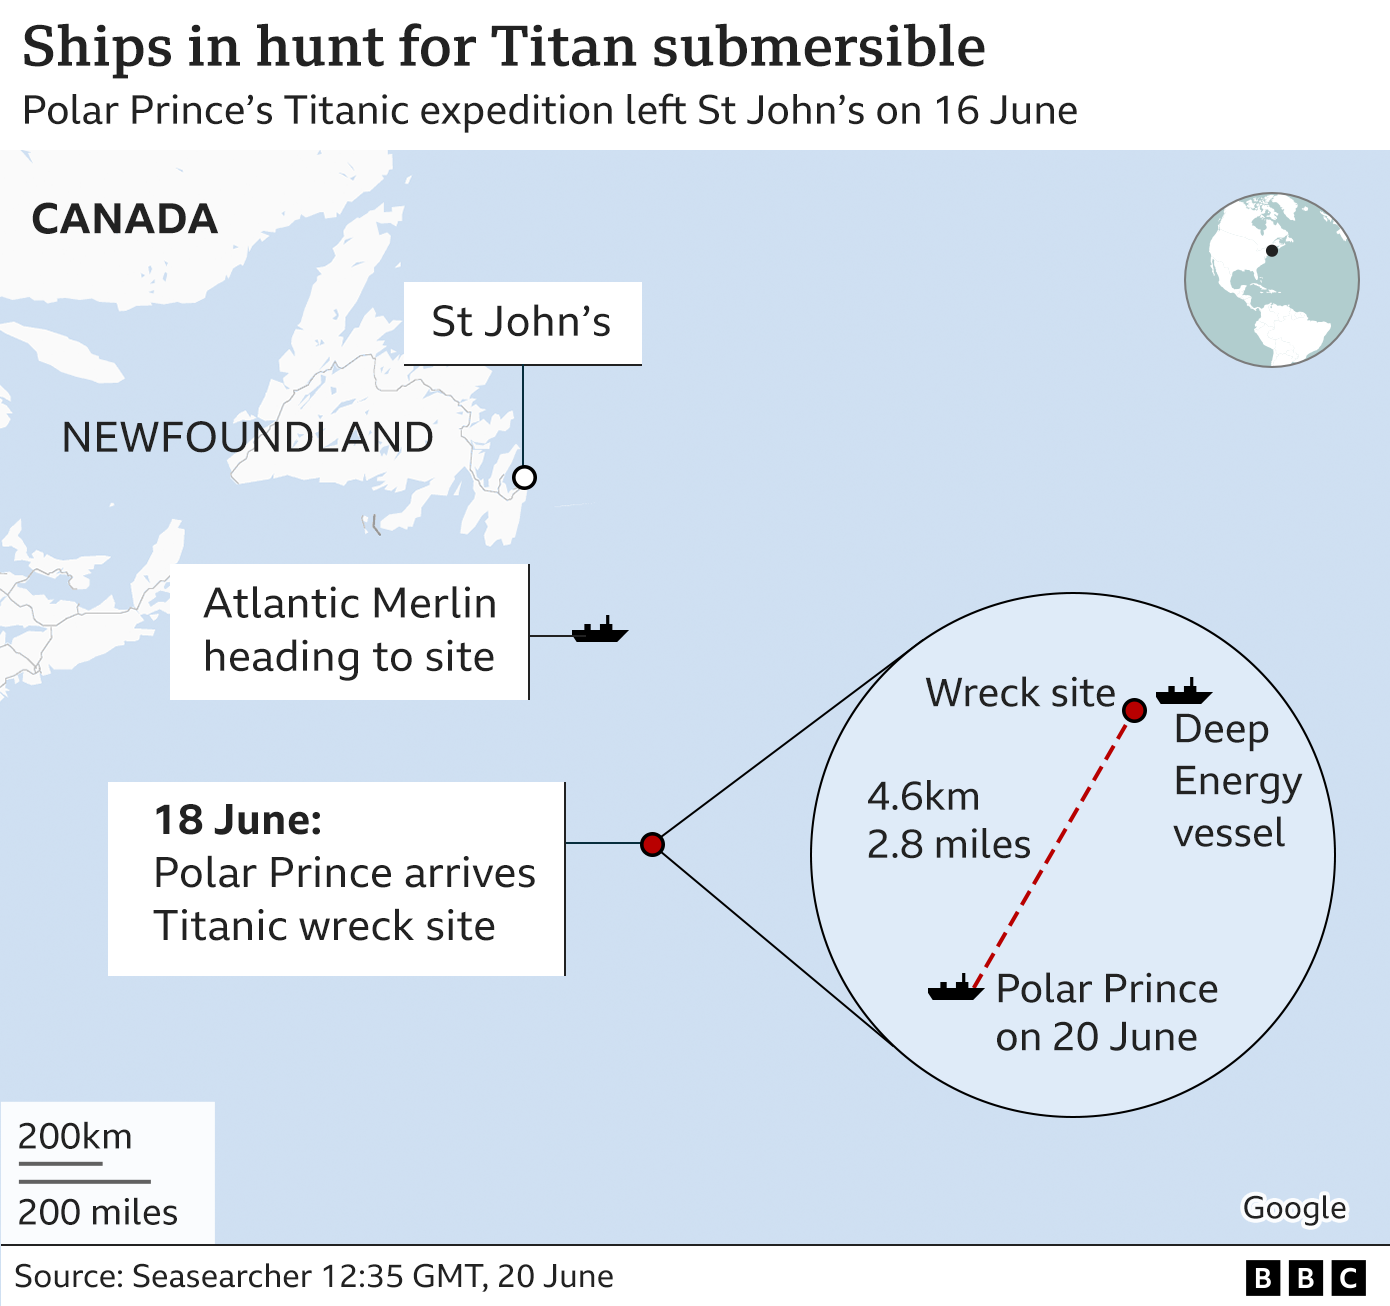 Map showing location of the Titanic wreck site in relation to Newfoundland and St John's and where the Polar Prince, Deep Energy and Atlantic Merlin vessels are